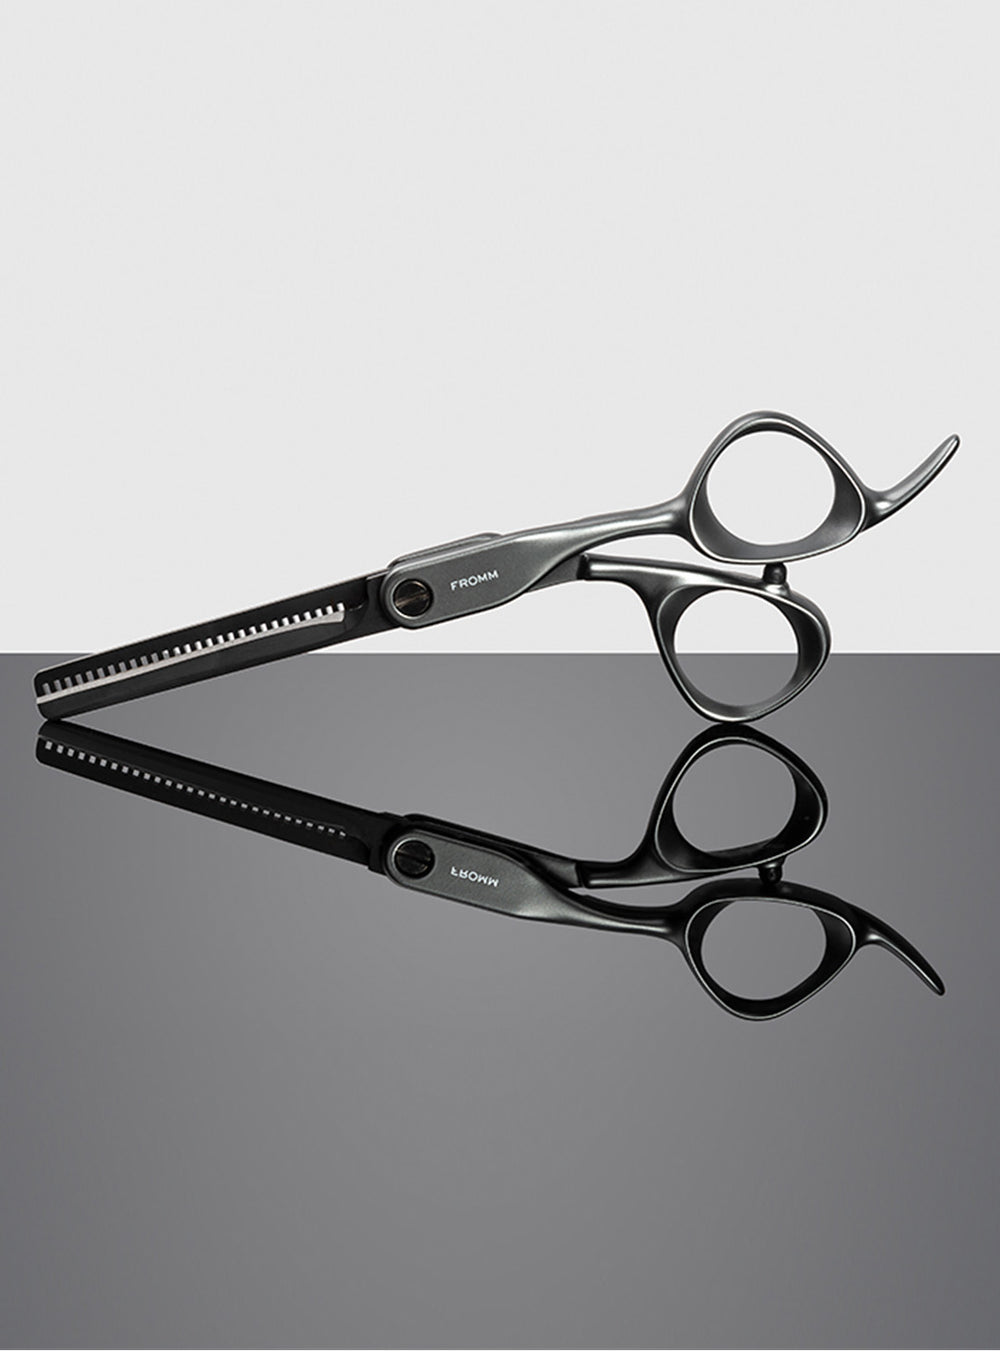 Fromm Invent 5.75” 28 Tooth Hair Thinning Shear